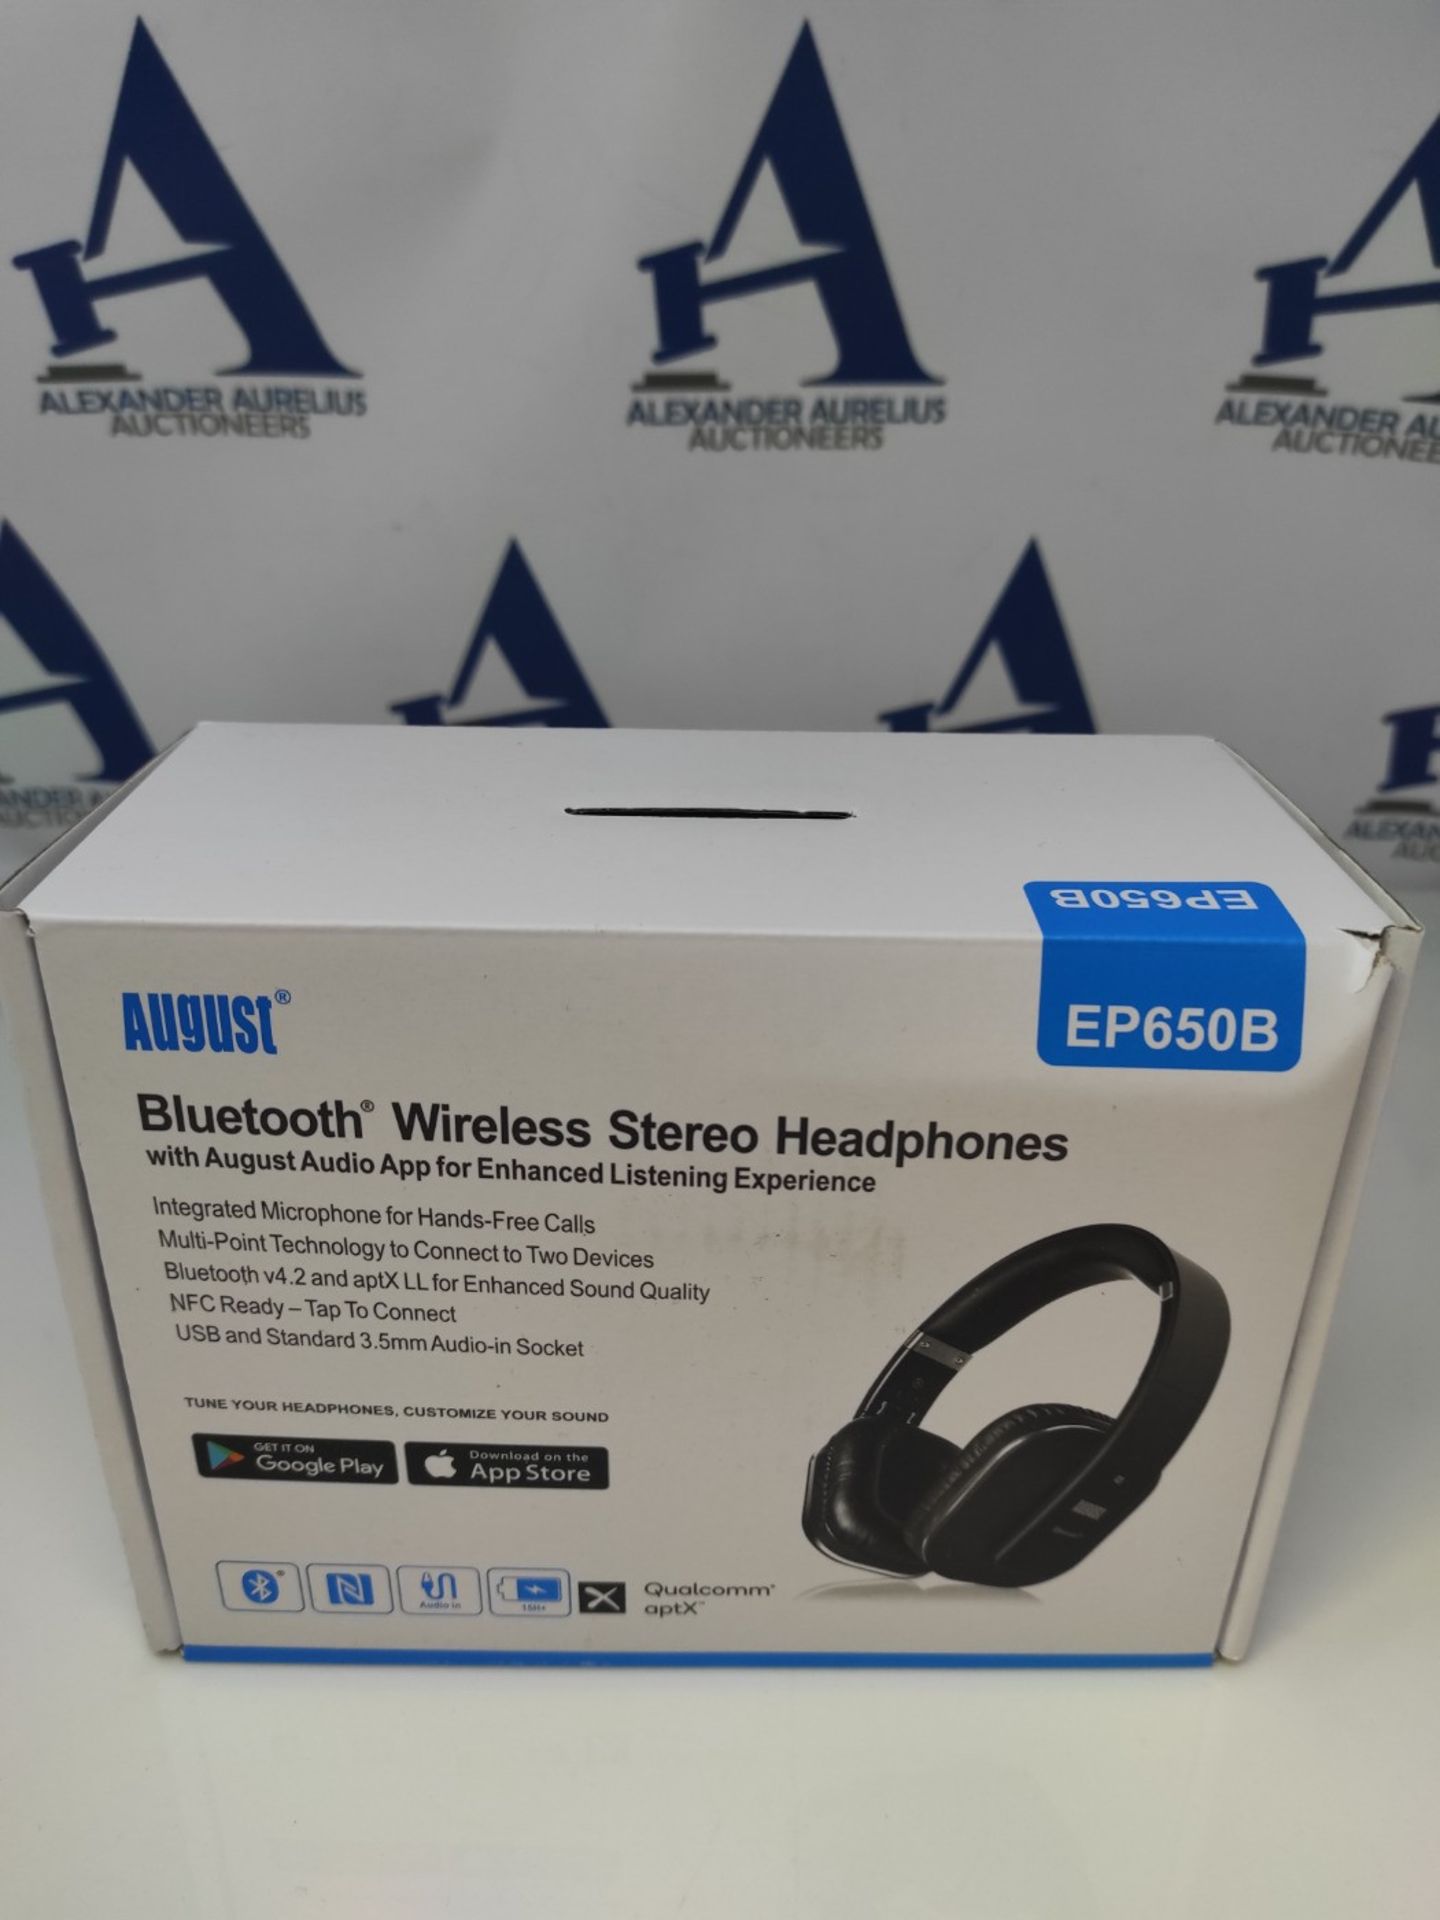 Wireless Bluetooth Headset 4.2 aptX Low Latency - August EP650 - Over Ear, Lightweight - Image 2 of 3